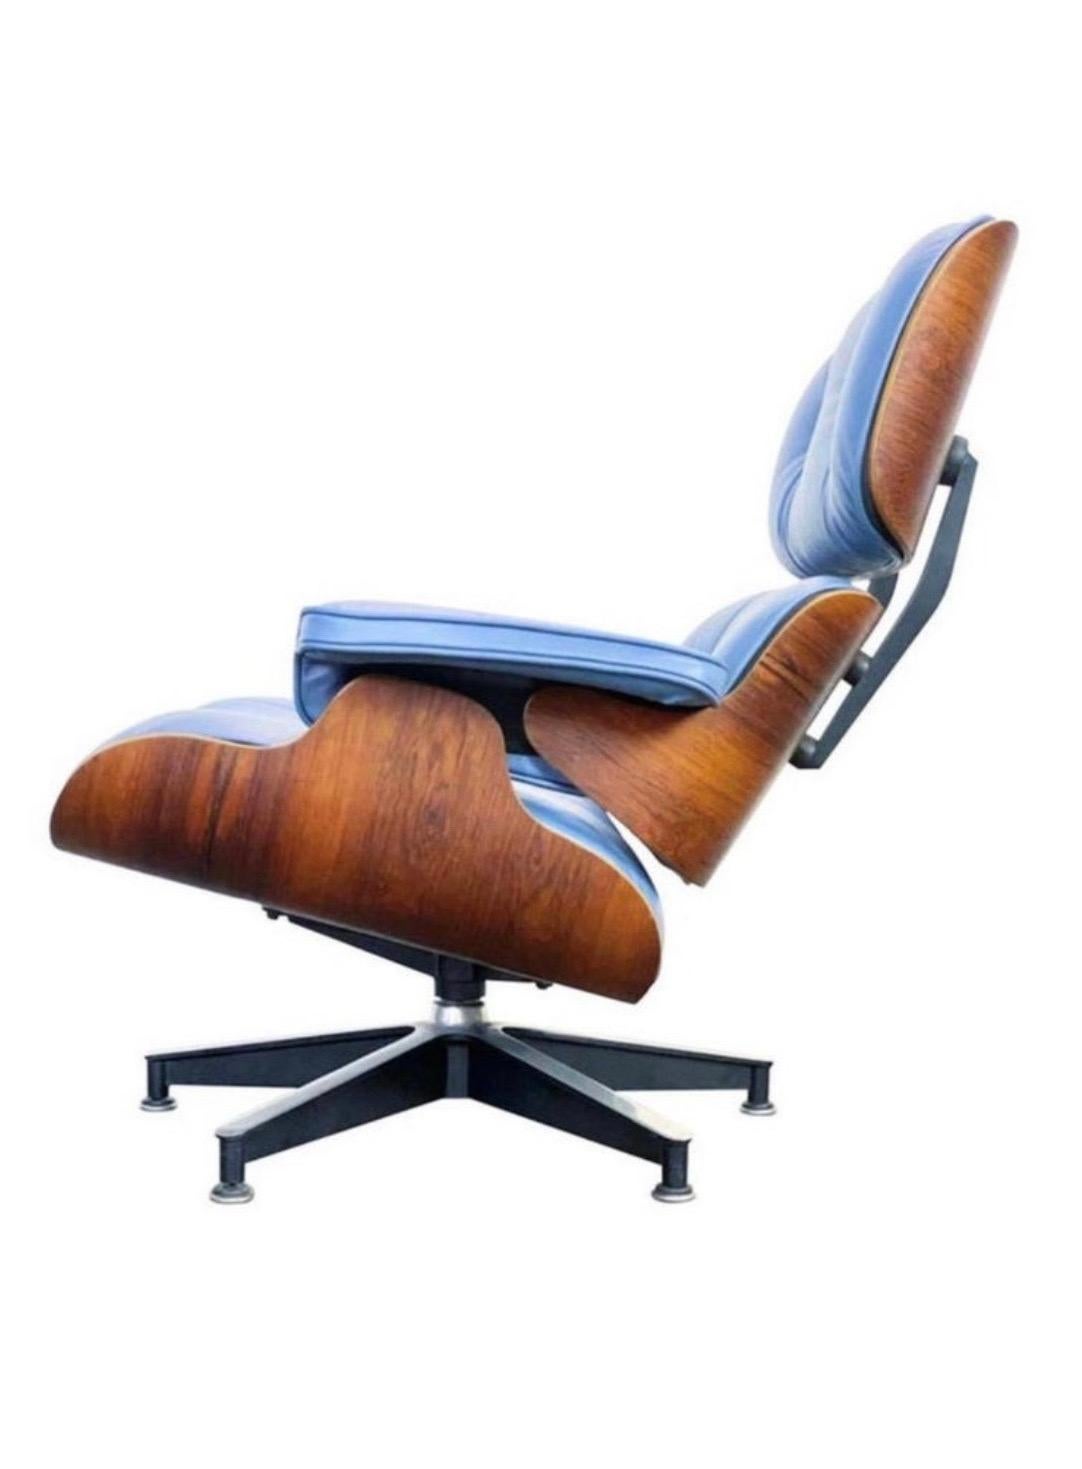 Restored Herman Miller Eames Lounge Chair with Custom Blue Leather For Sale 1